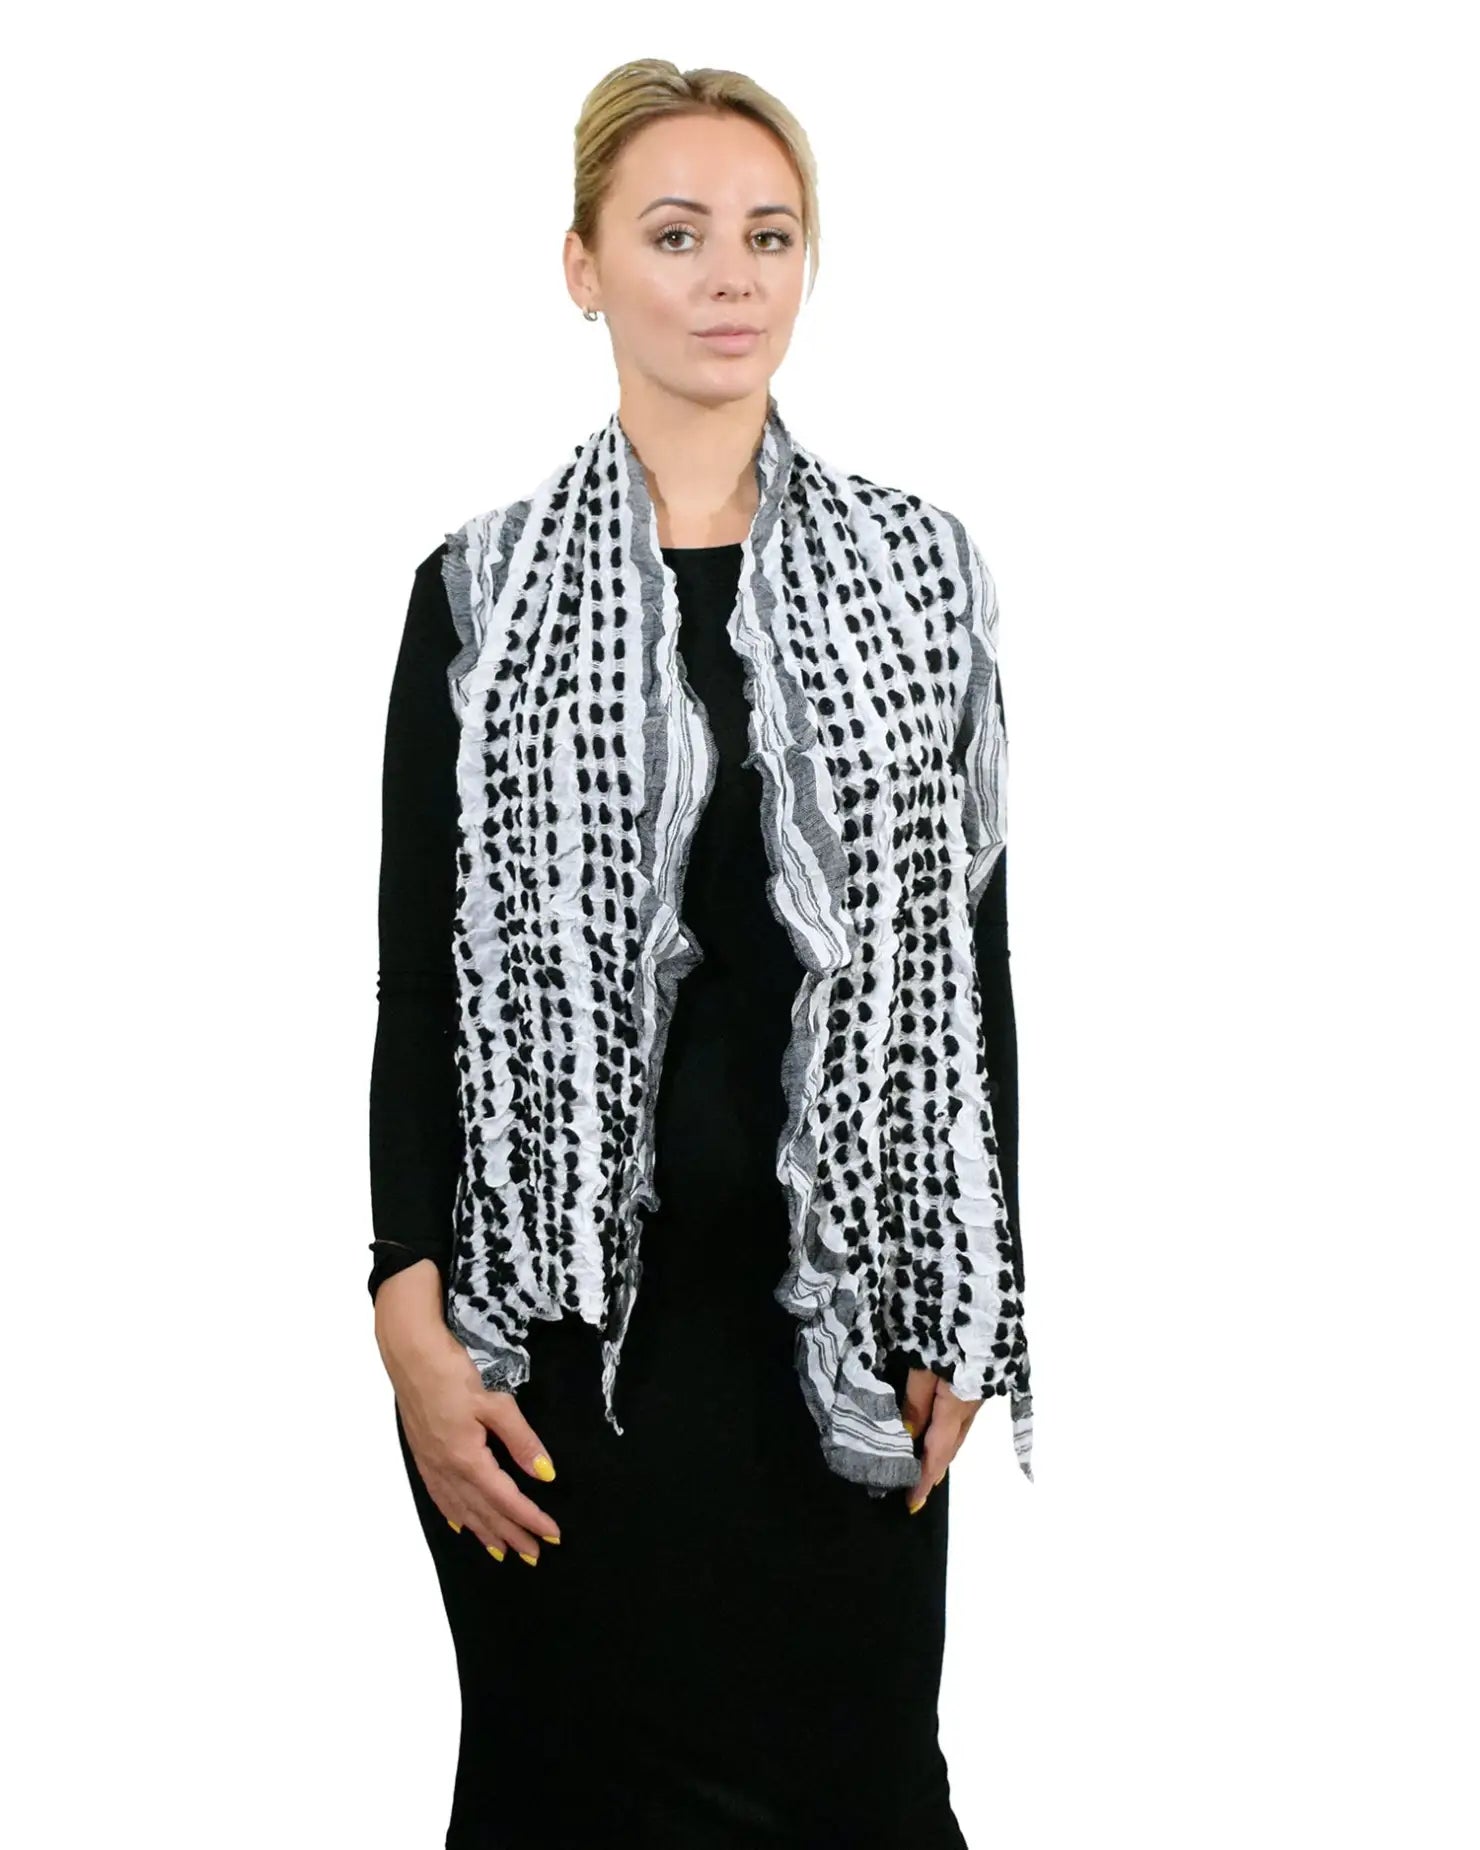 Soft Knitted Striped Print Scarf on Woman